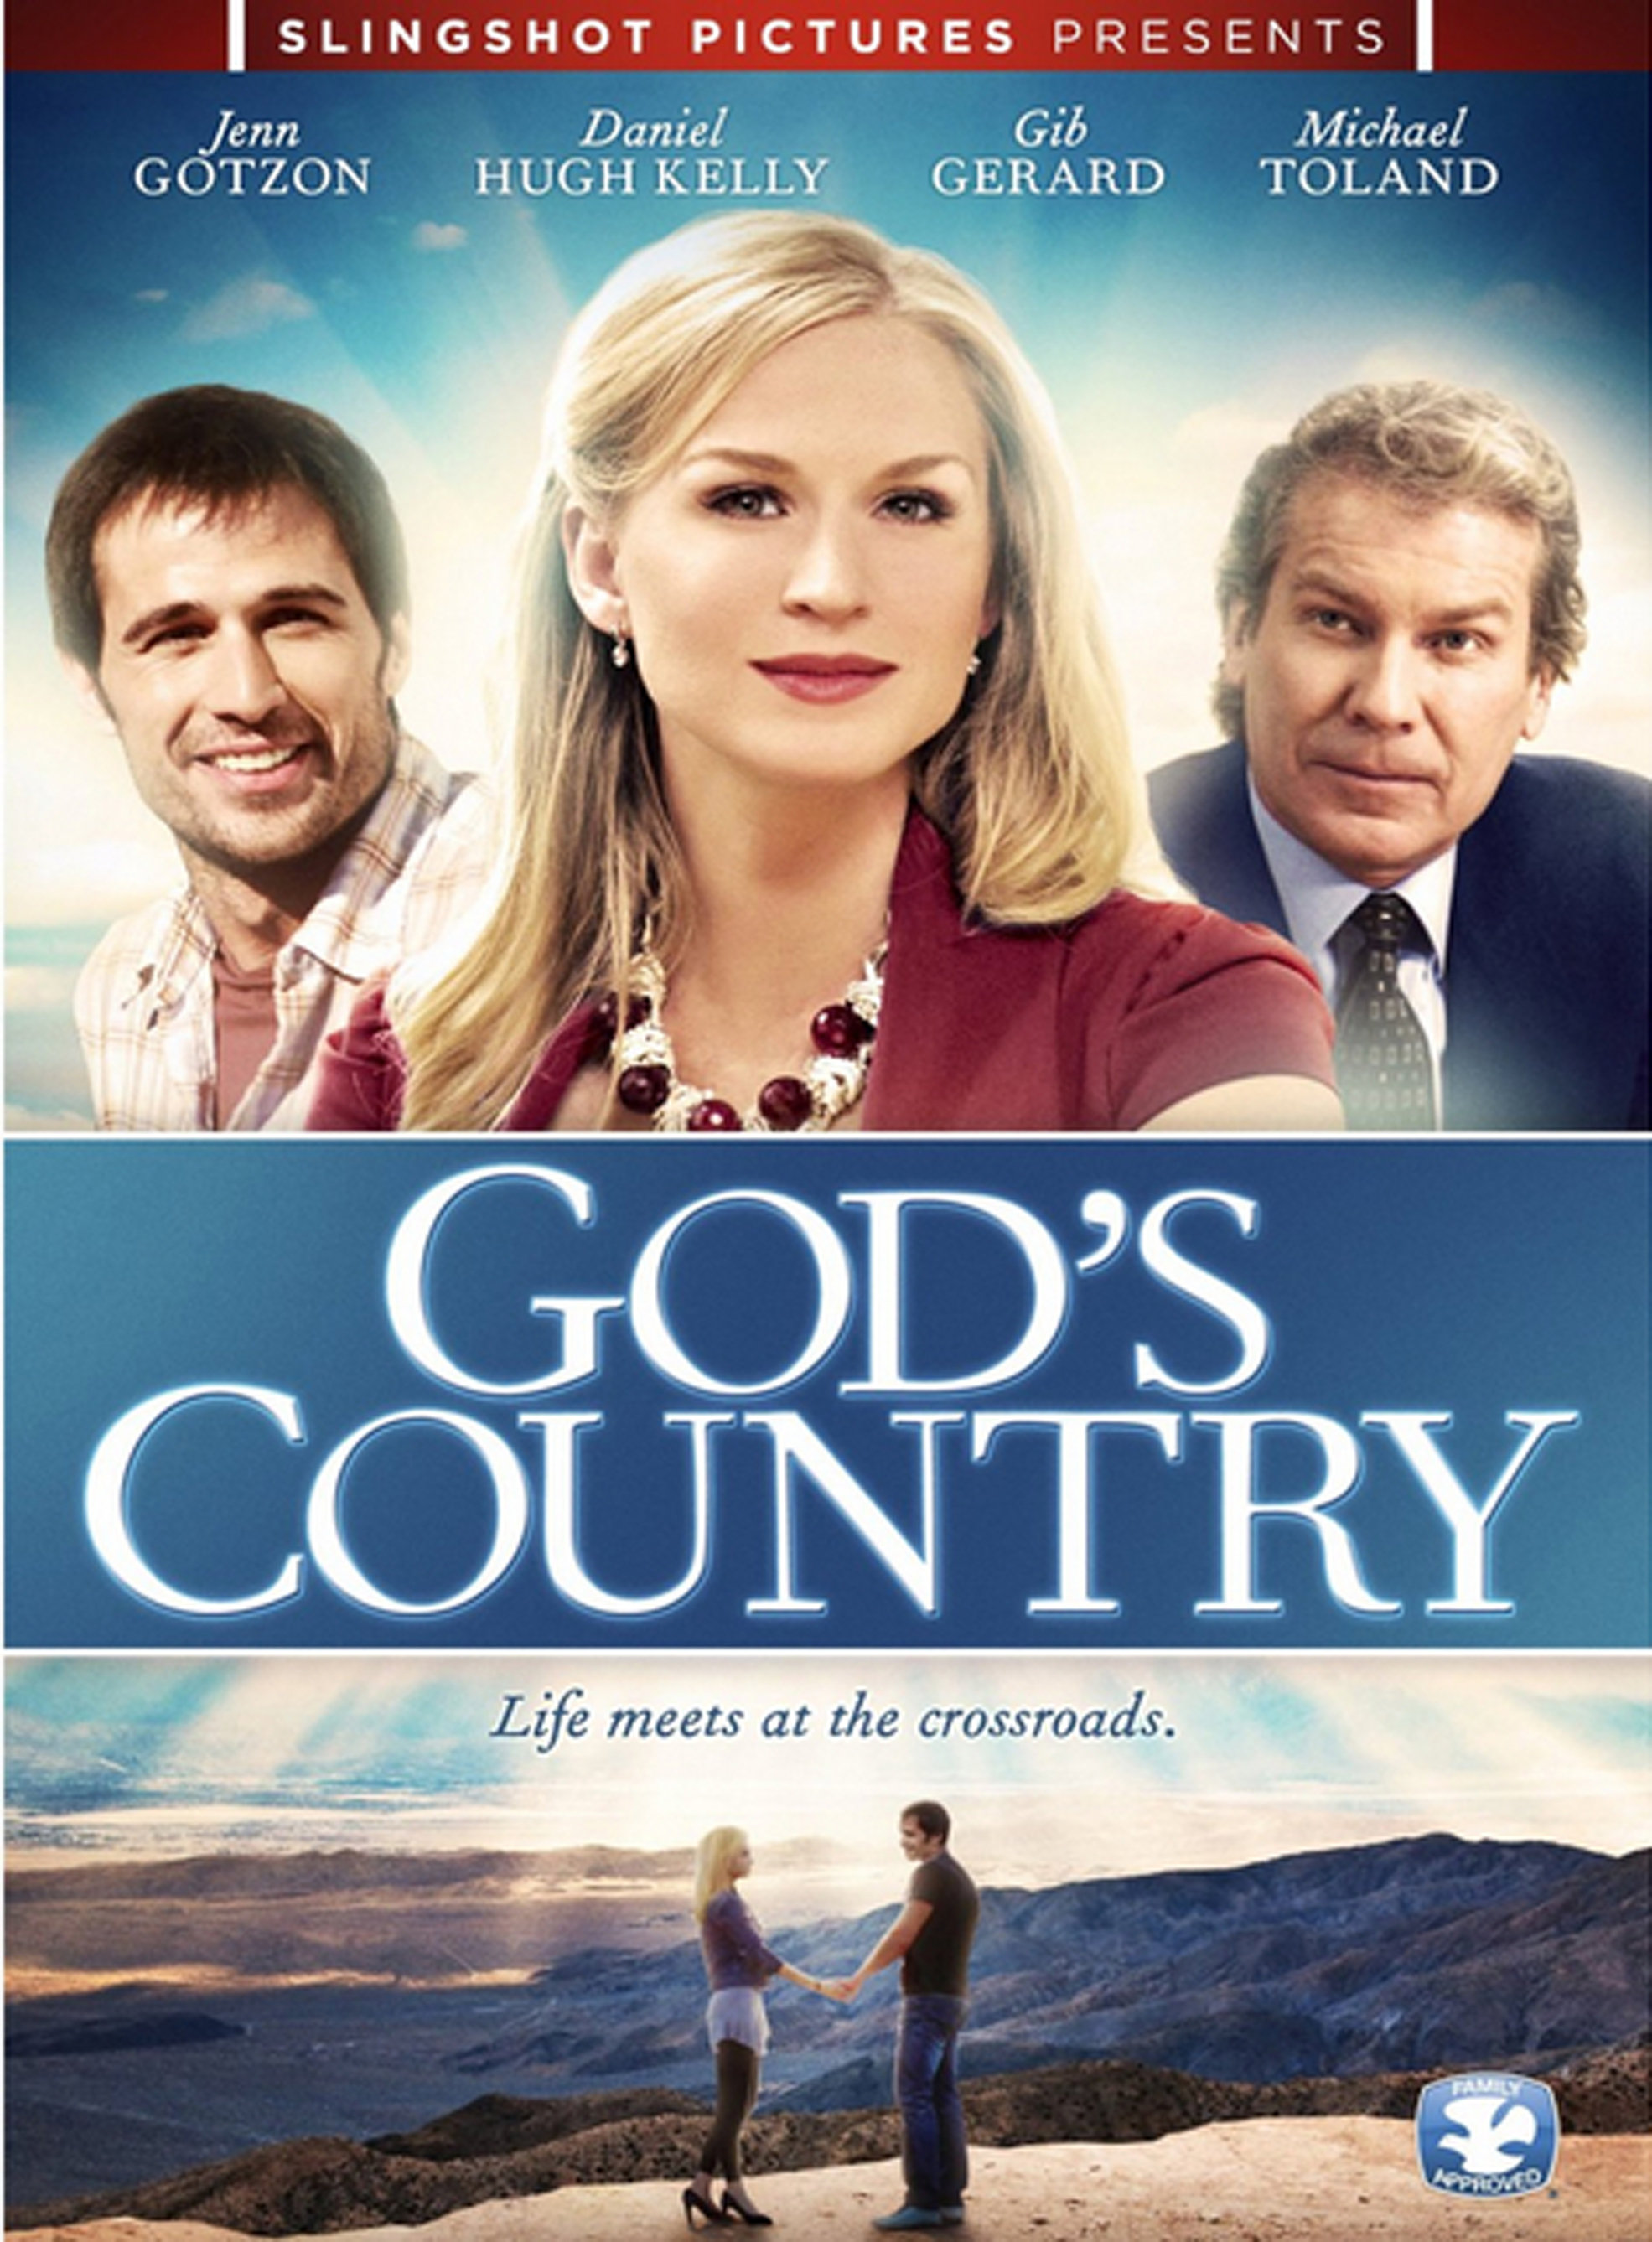 Daniel Hugh Kelly, Michael Toland, Jenn Gotzon, Chris Armstrong, Cecil Chambers, Christopher Ridder, Gib Gerard and John Atterberry in God's Country (2012)